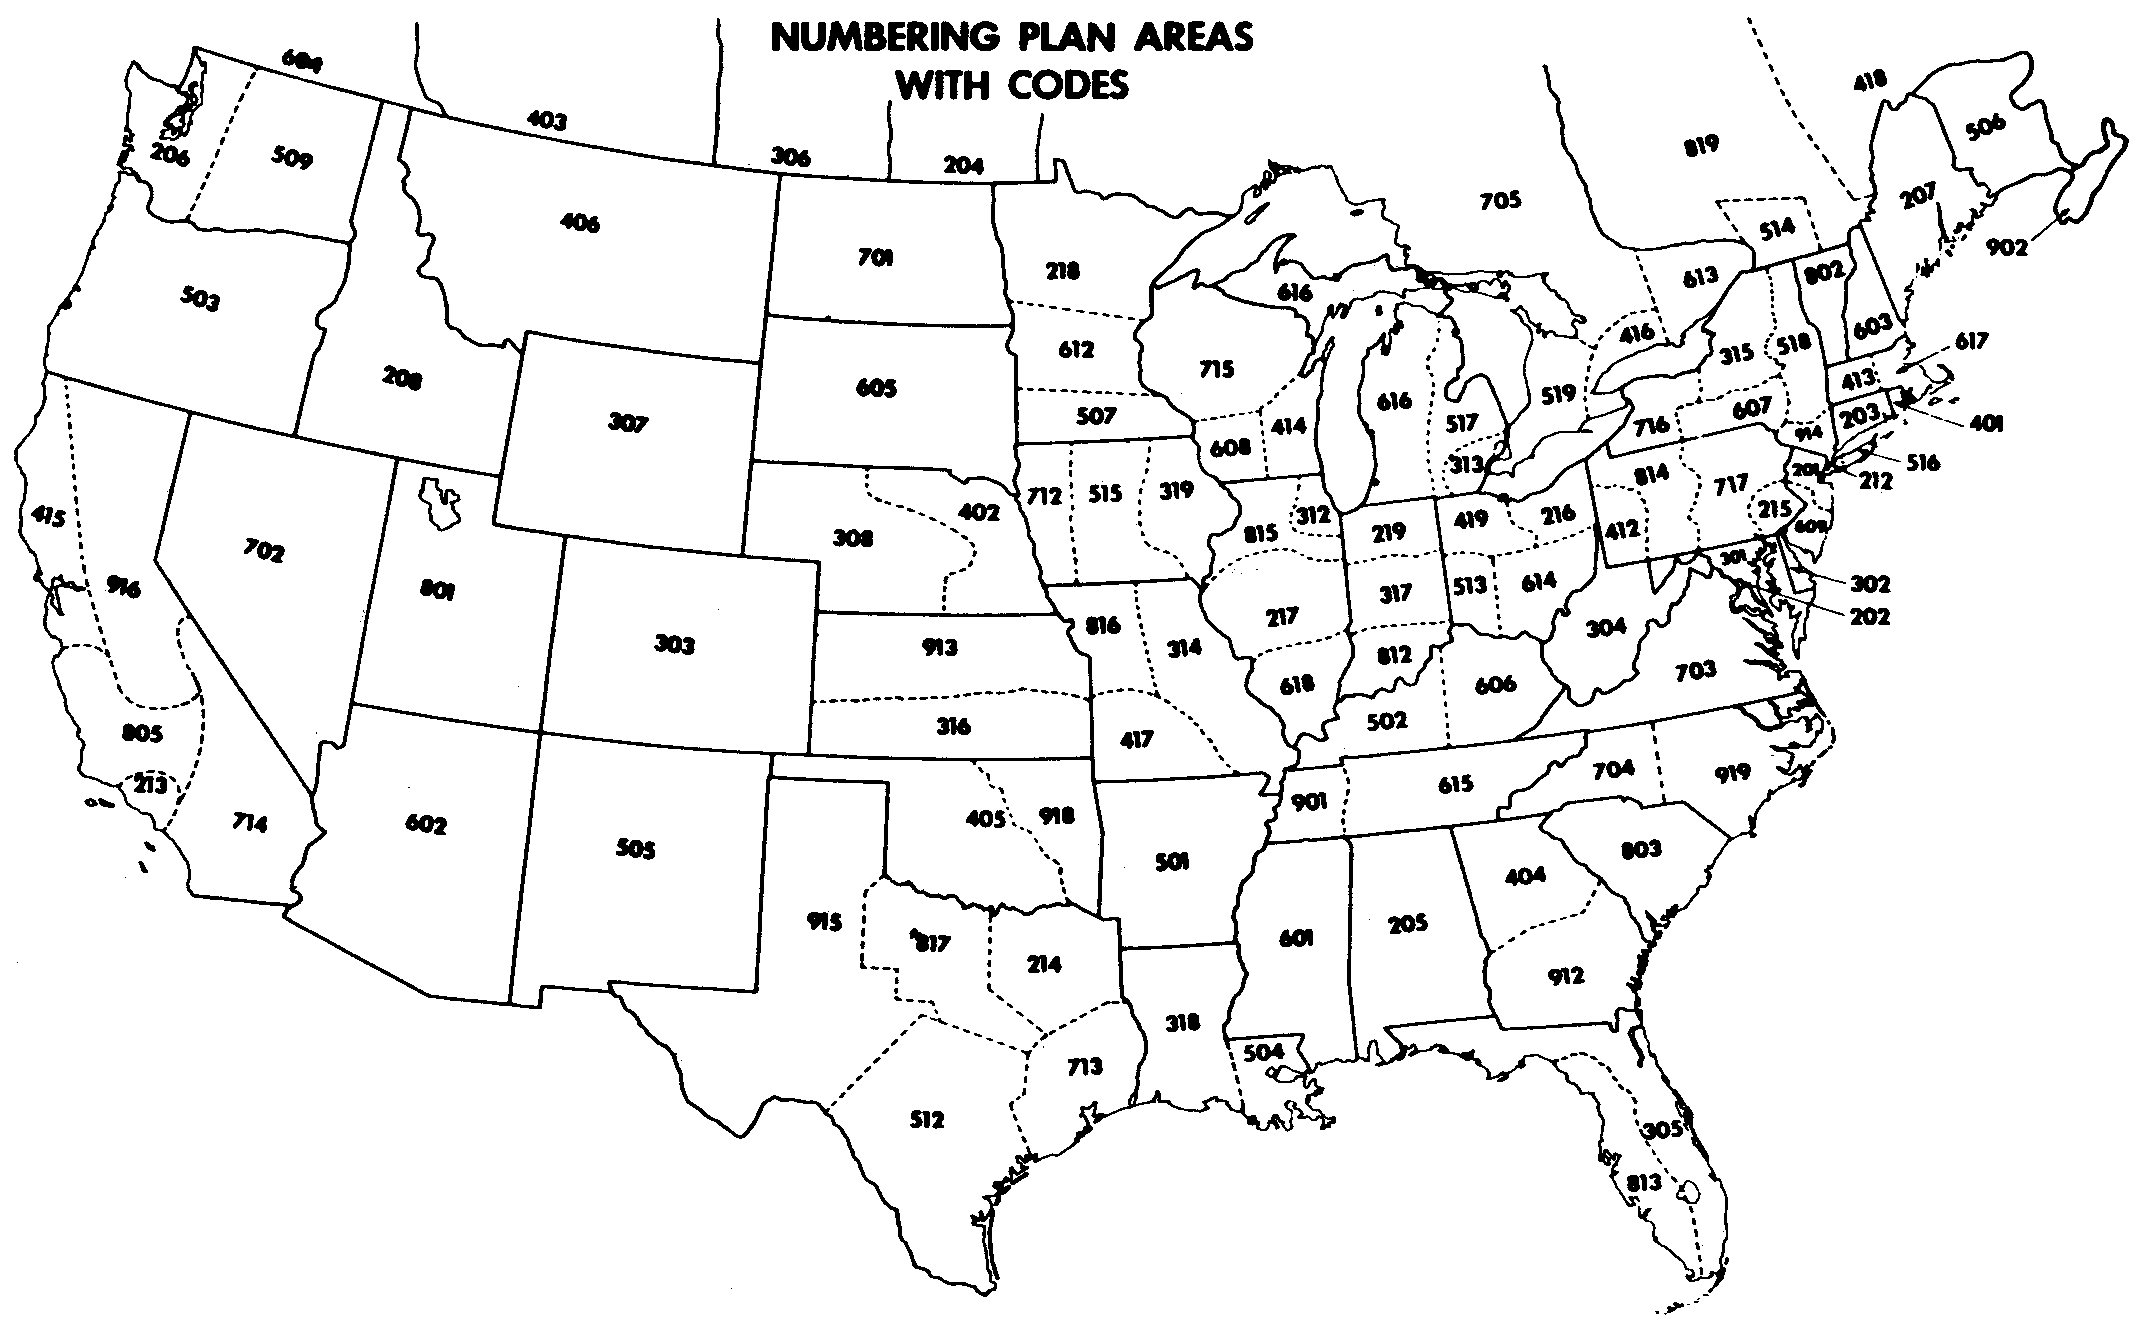 usa telephone area codes - DriverLayer Search Engine.